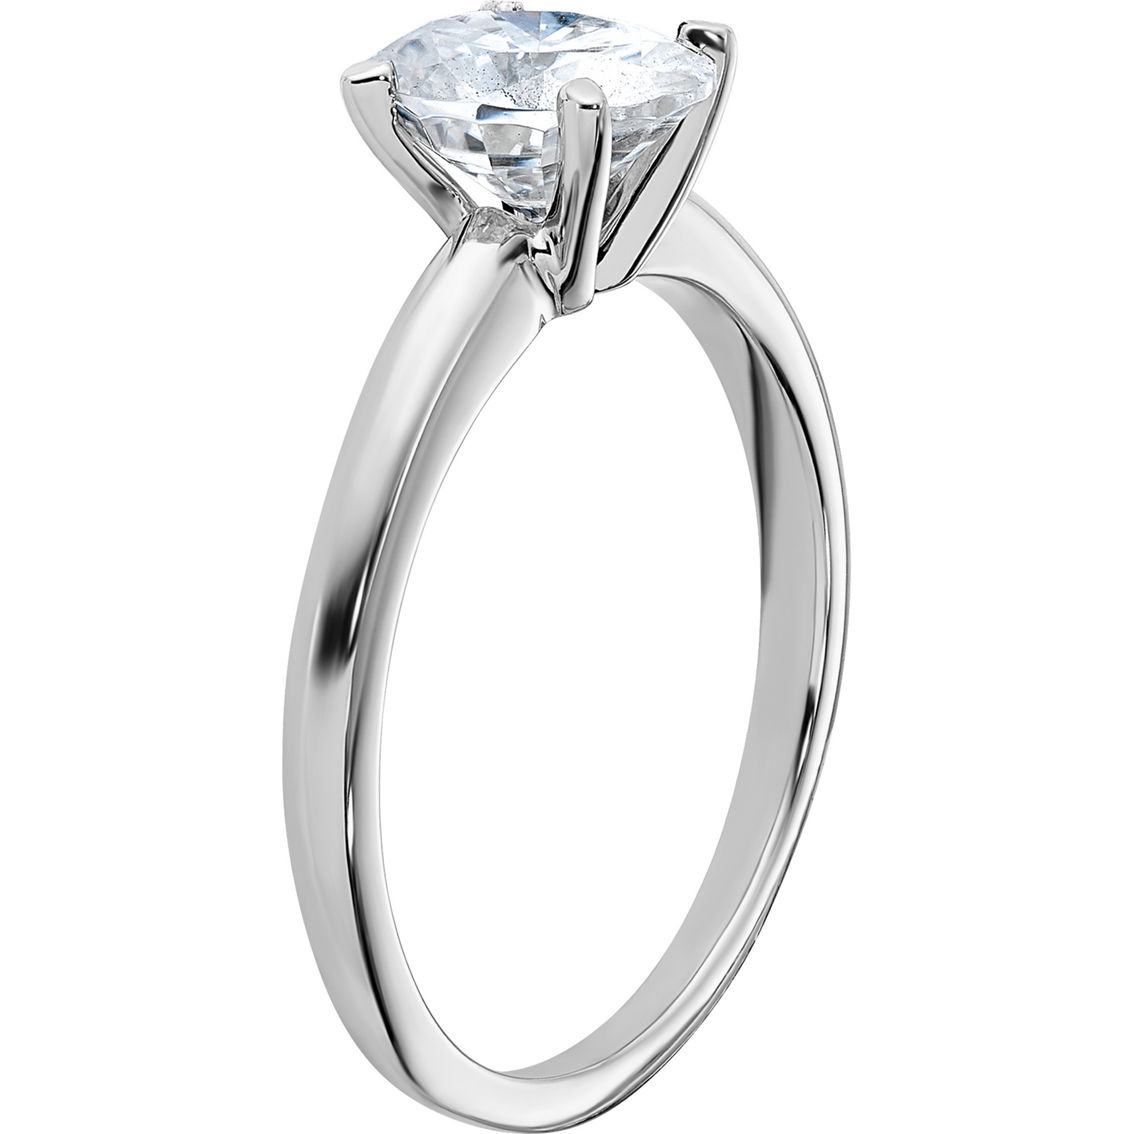 True Origin 14K Gold 1 1/2 ct. Certified Oval Lab Grown Diamond Solitaire Ring - Image 3 of 4